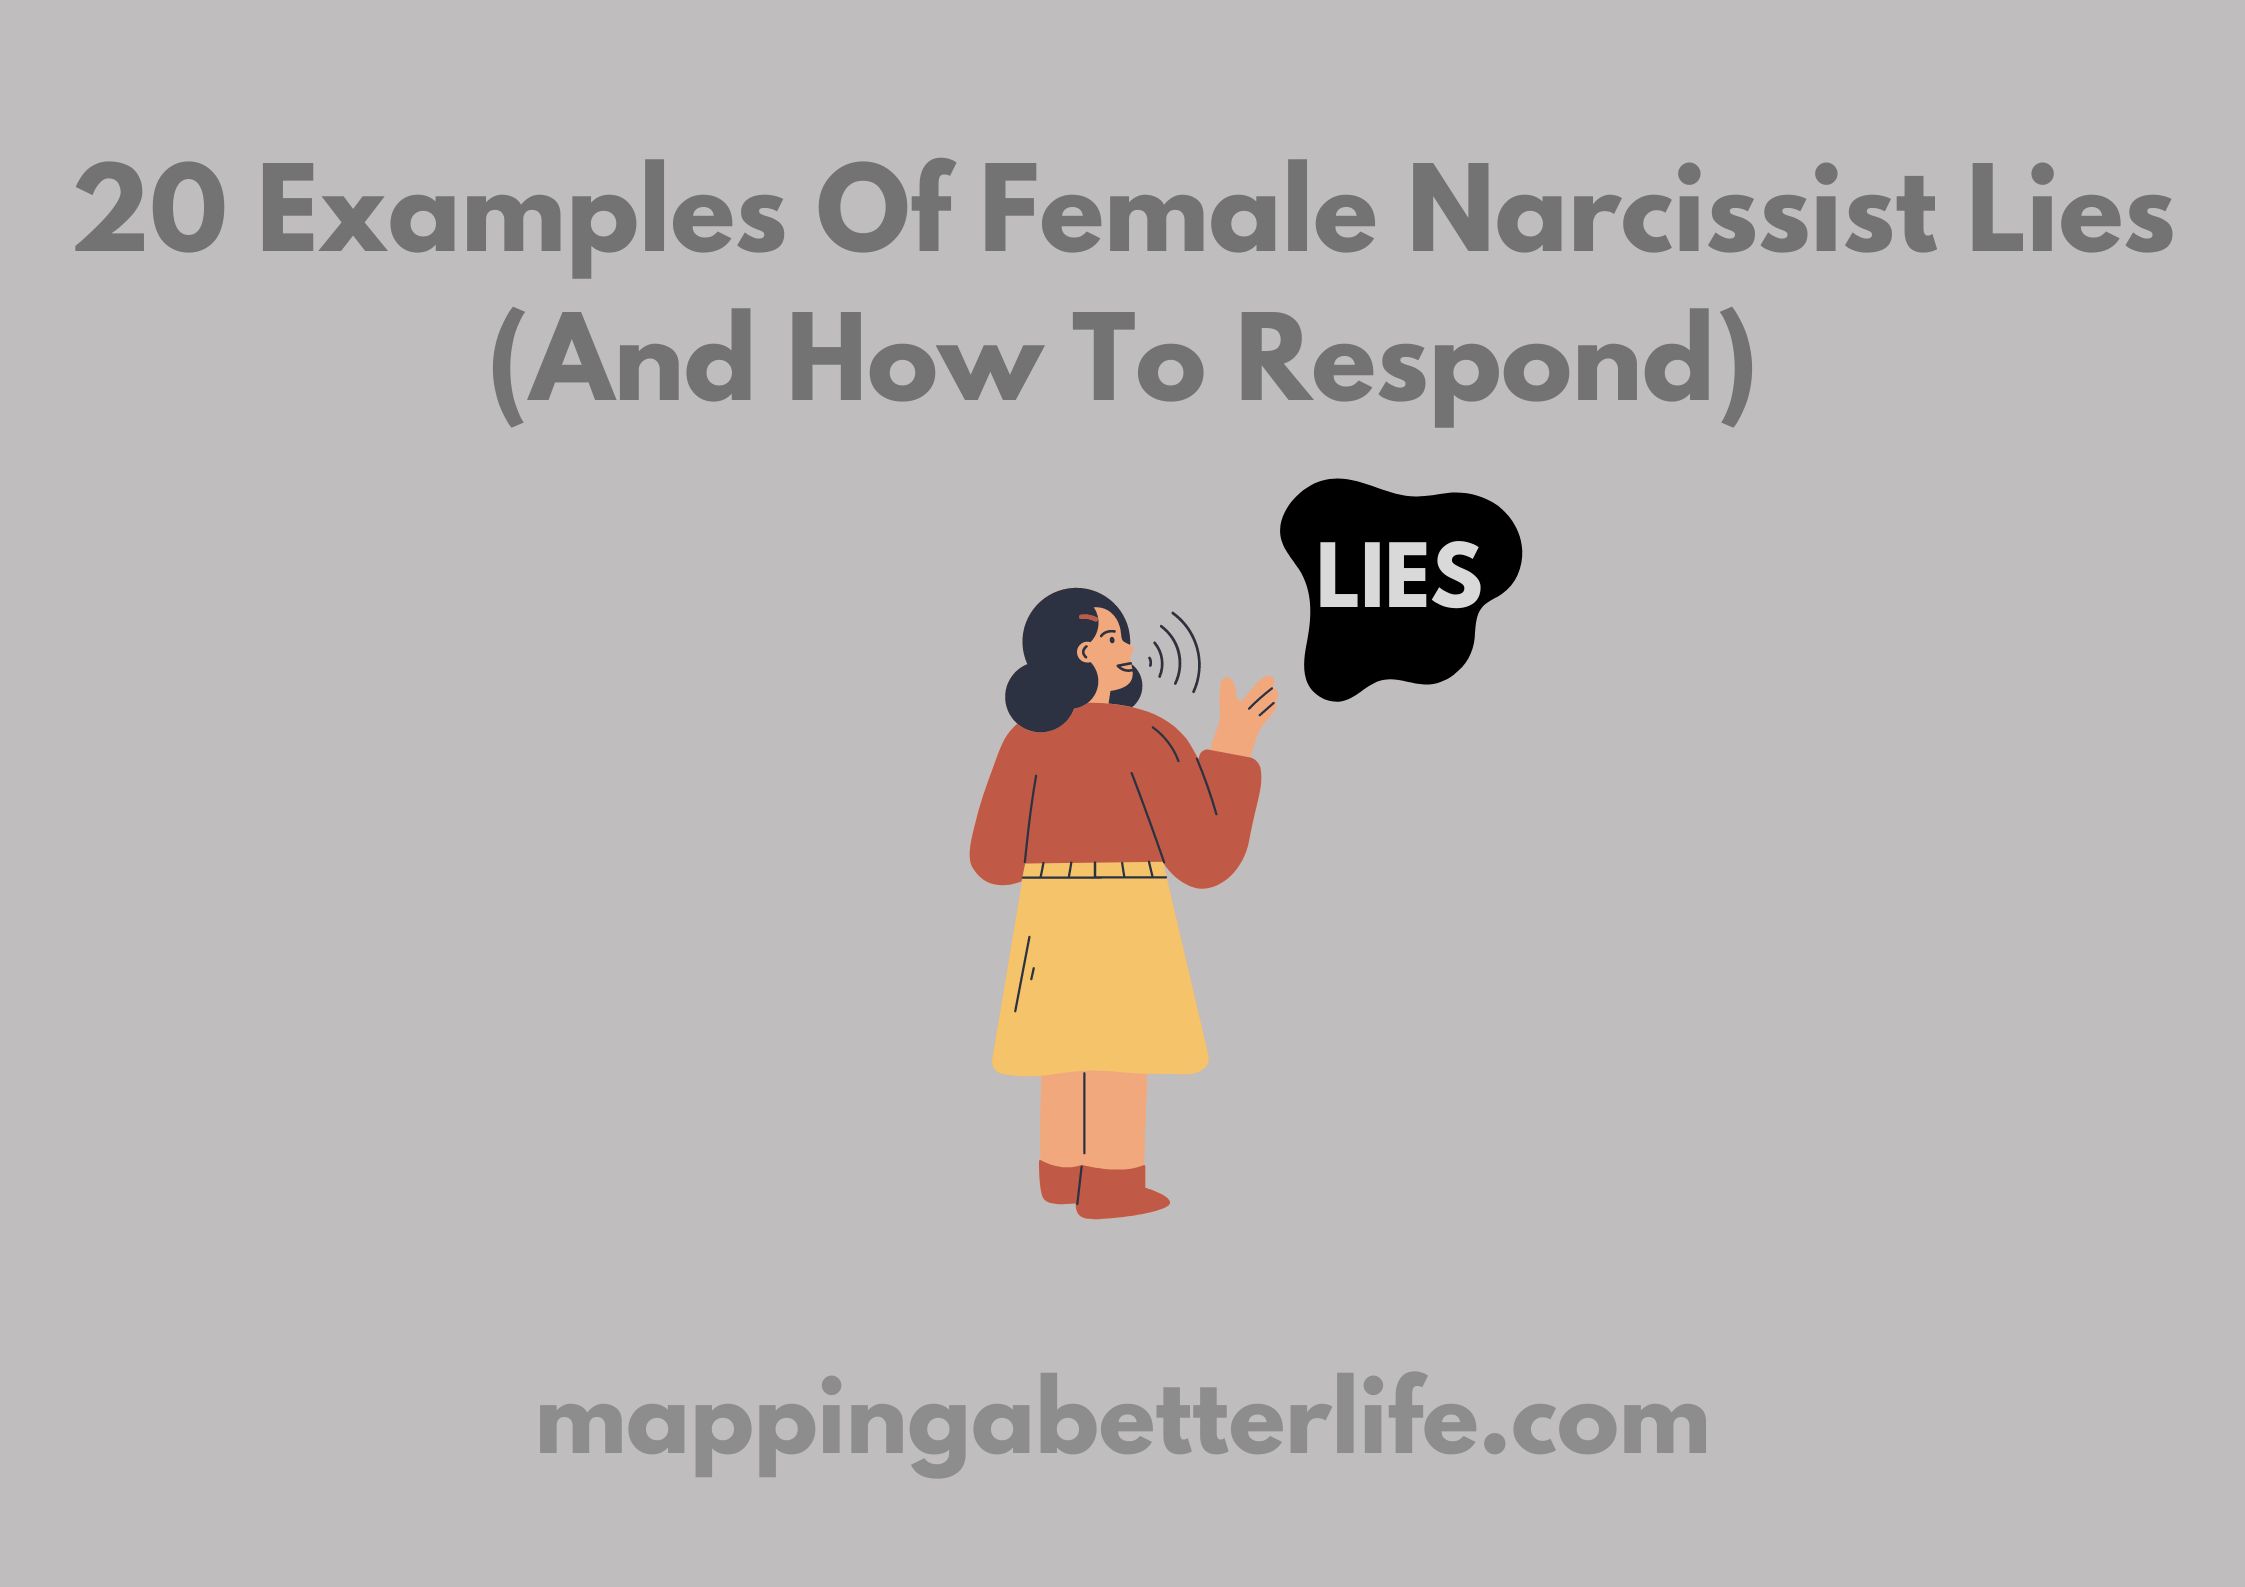 20 Examples Of Female Narcissist Lies (And How To Respond)